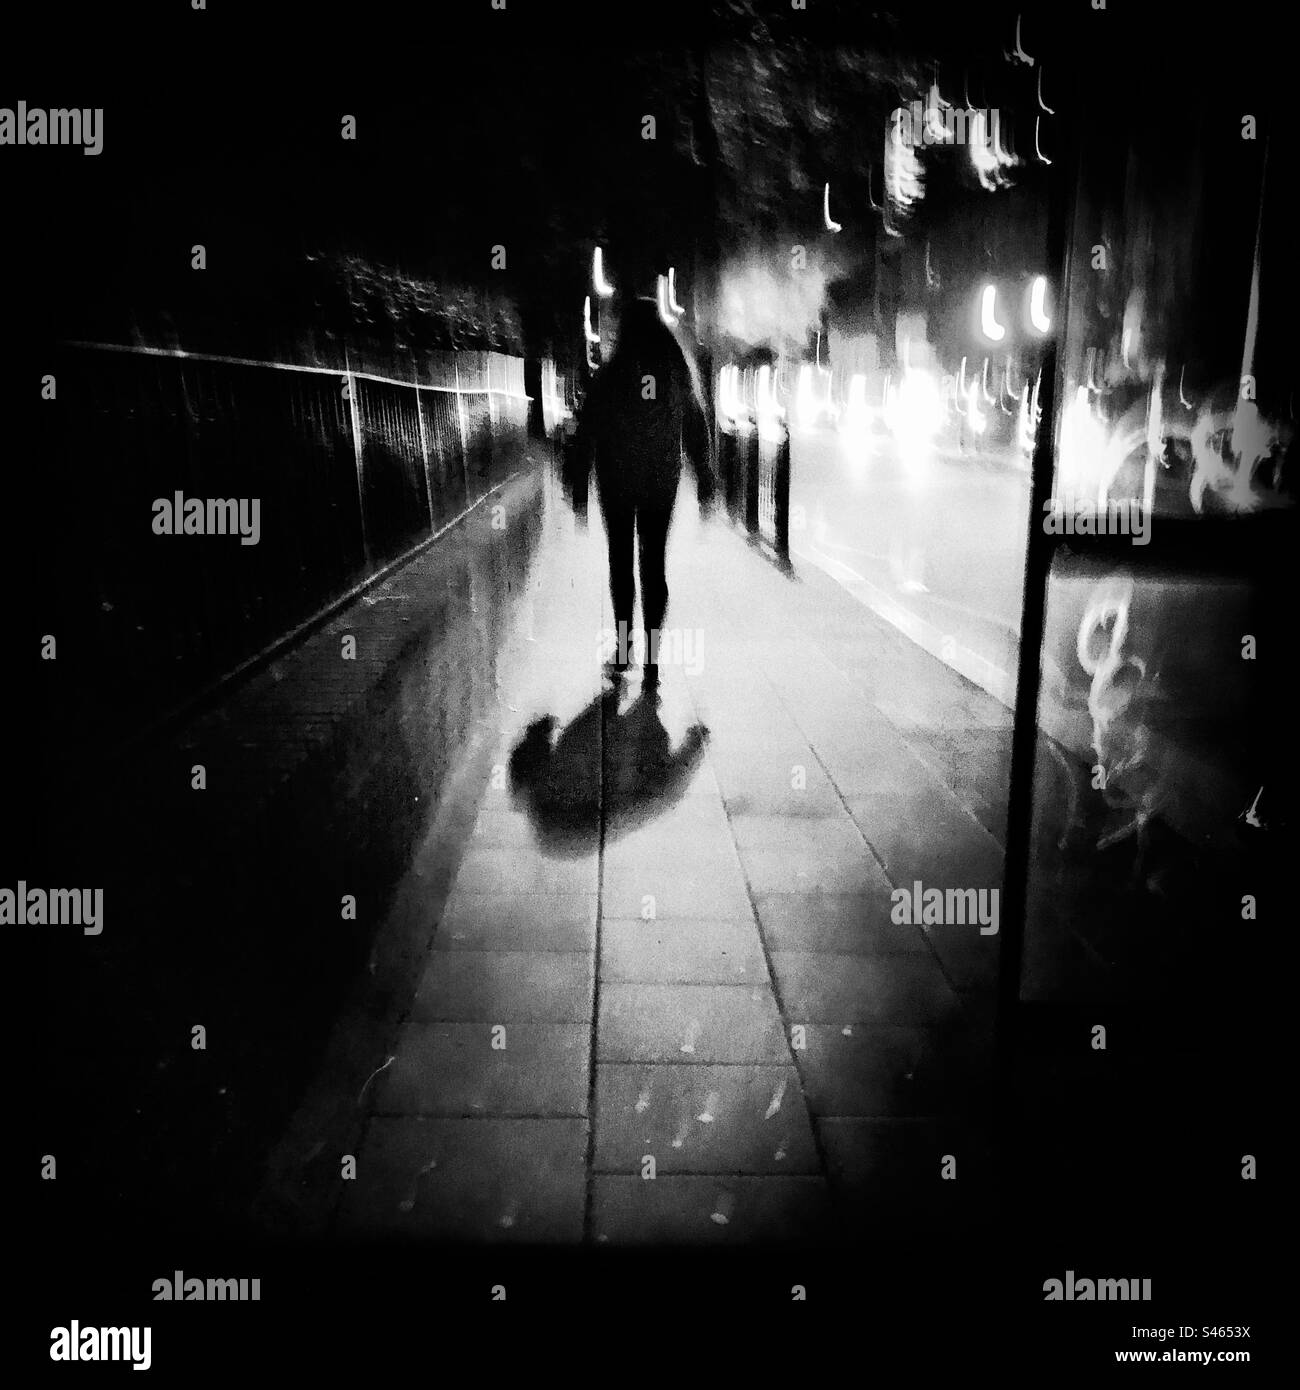 Silhouette of a woman waking on the pavement at night Stock Photo